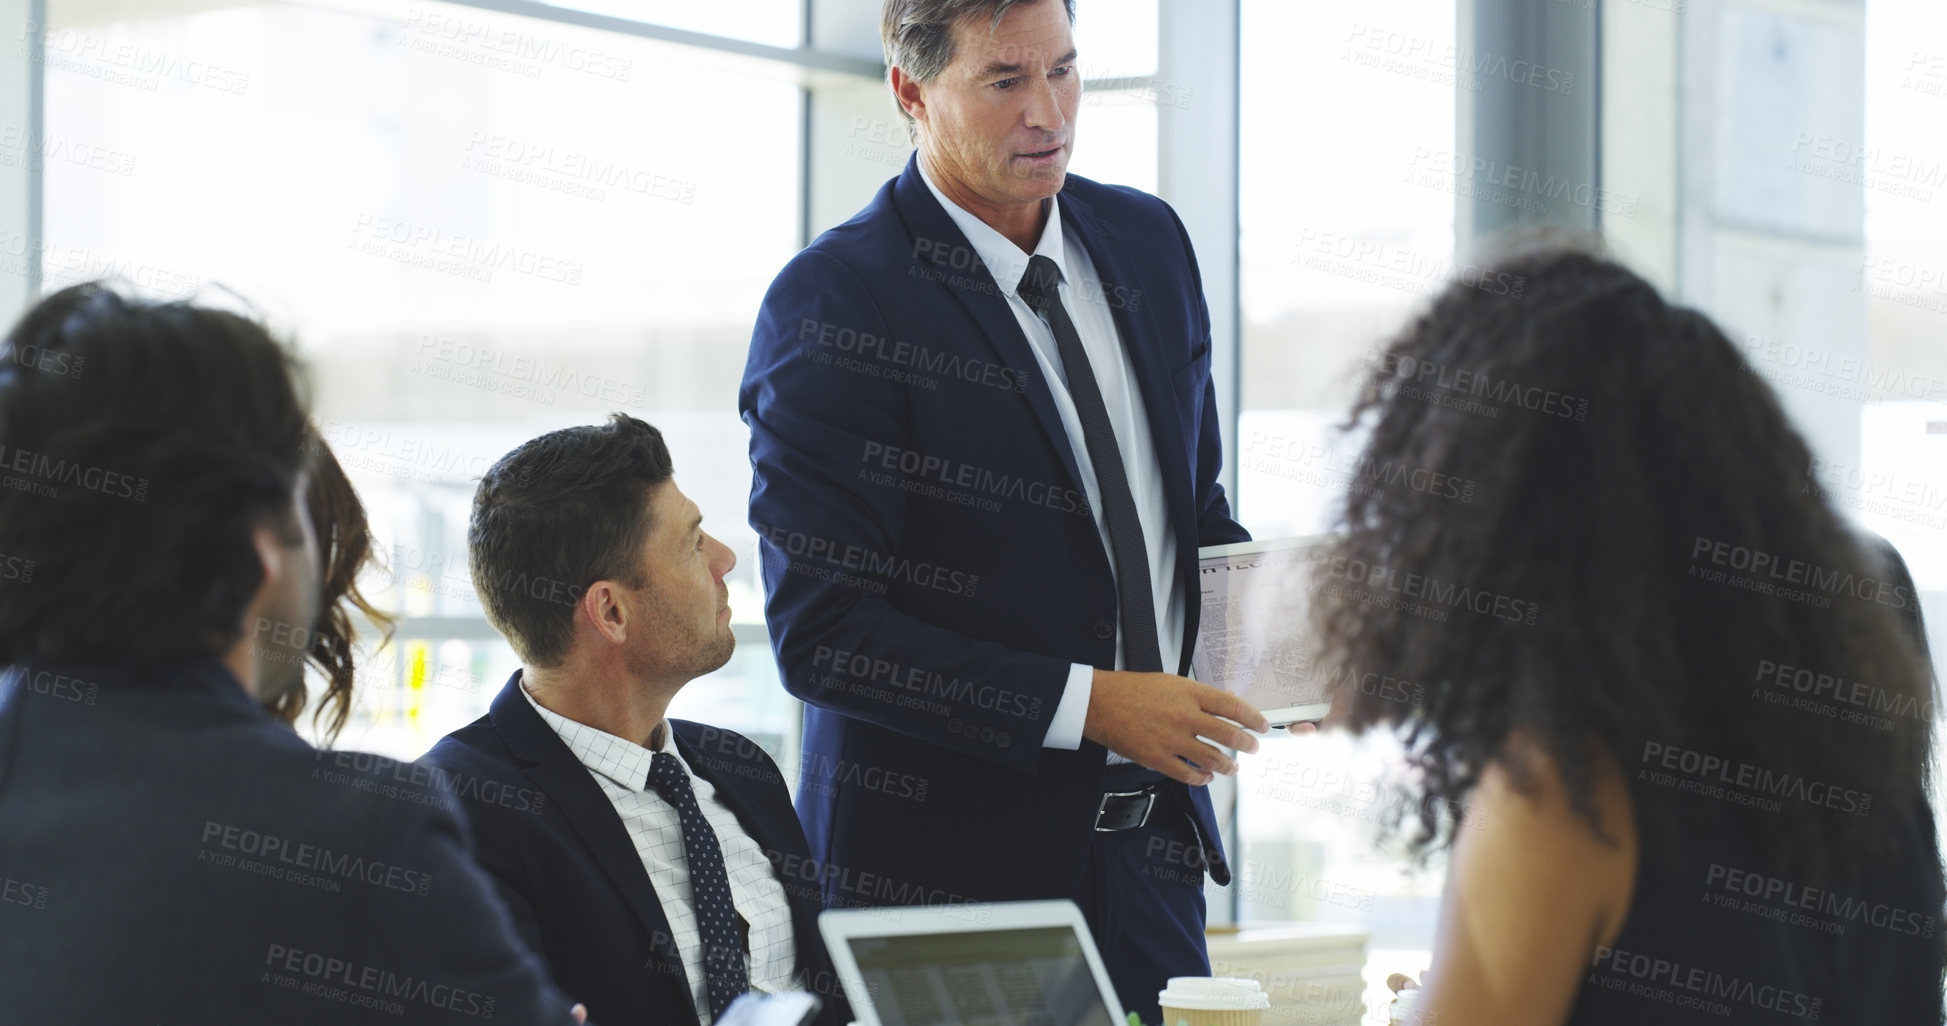 Buy stock photo Cropped shot of a businessman using a digital tablet while giving a presentation to his colleagues in an office